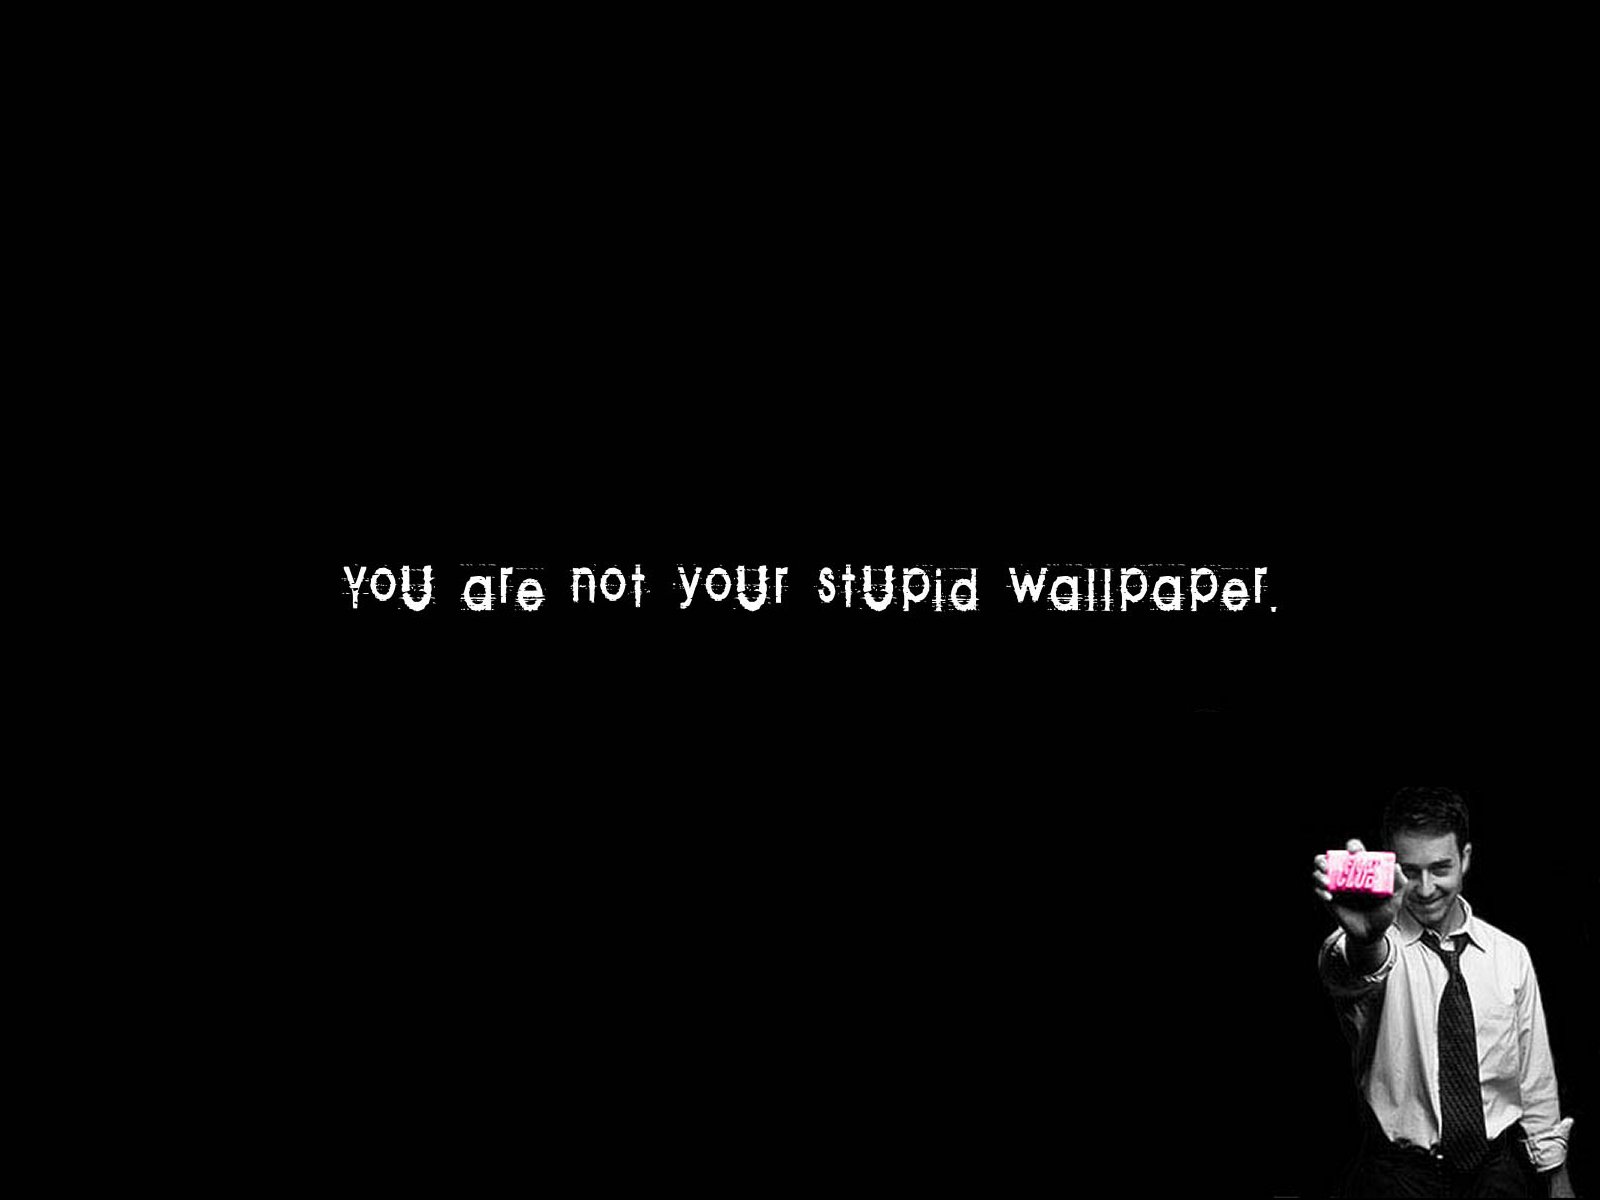 You are not your stupid wallpaper